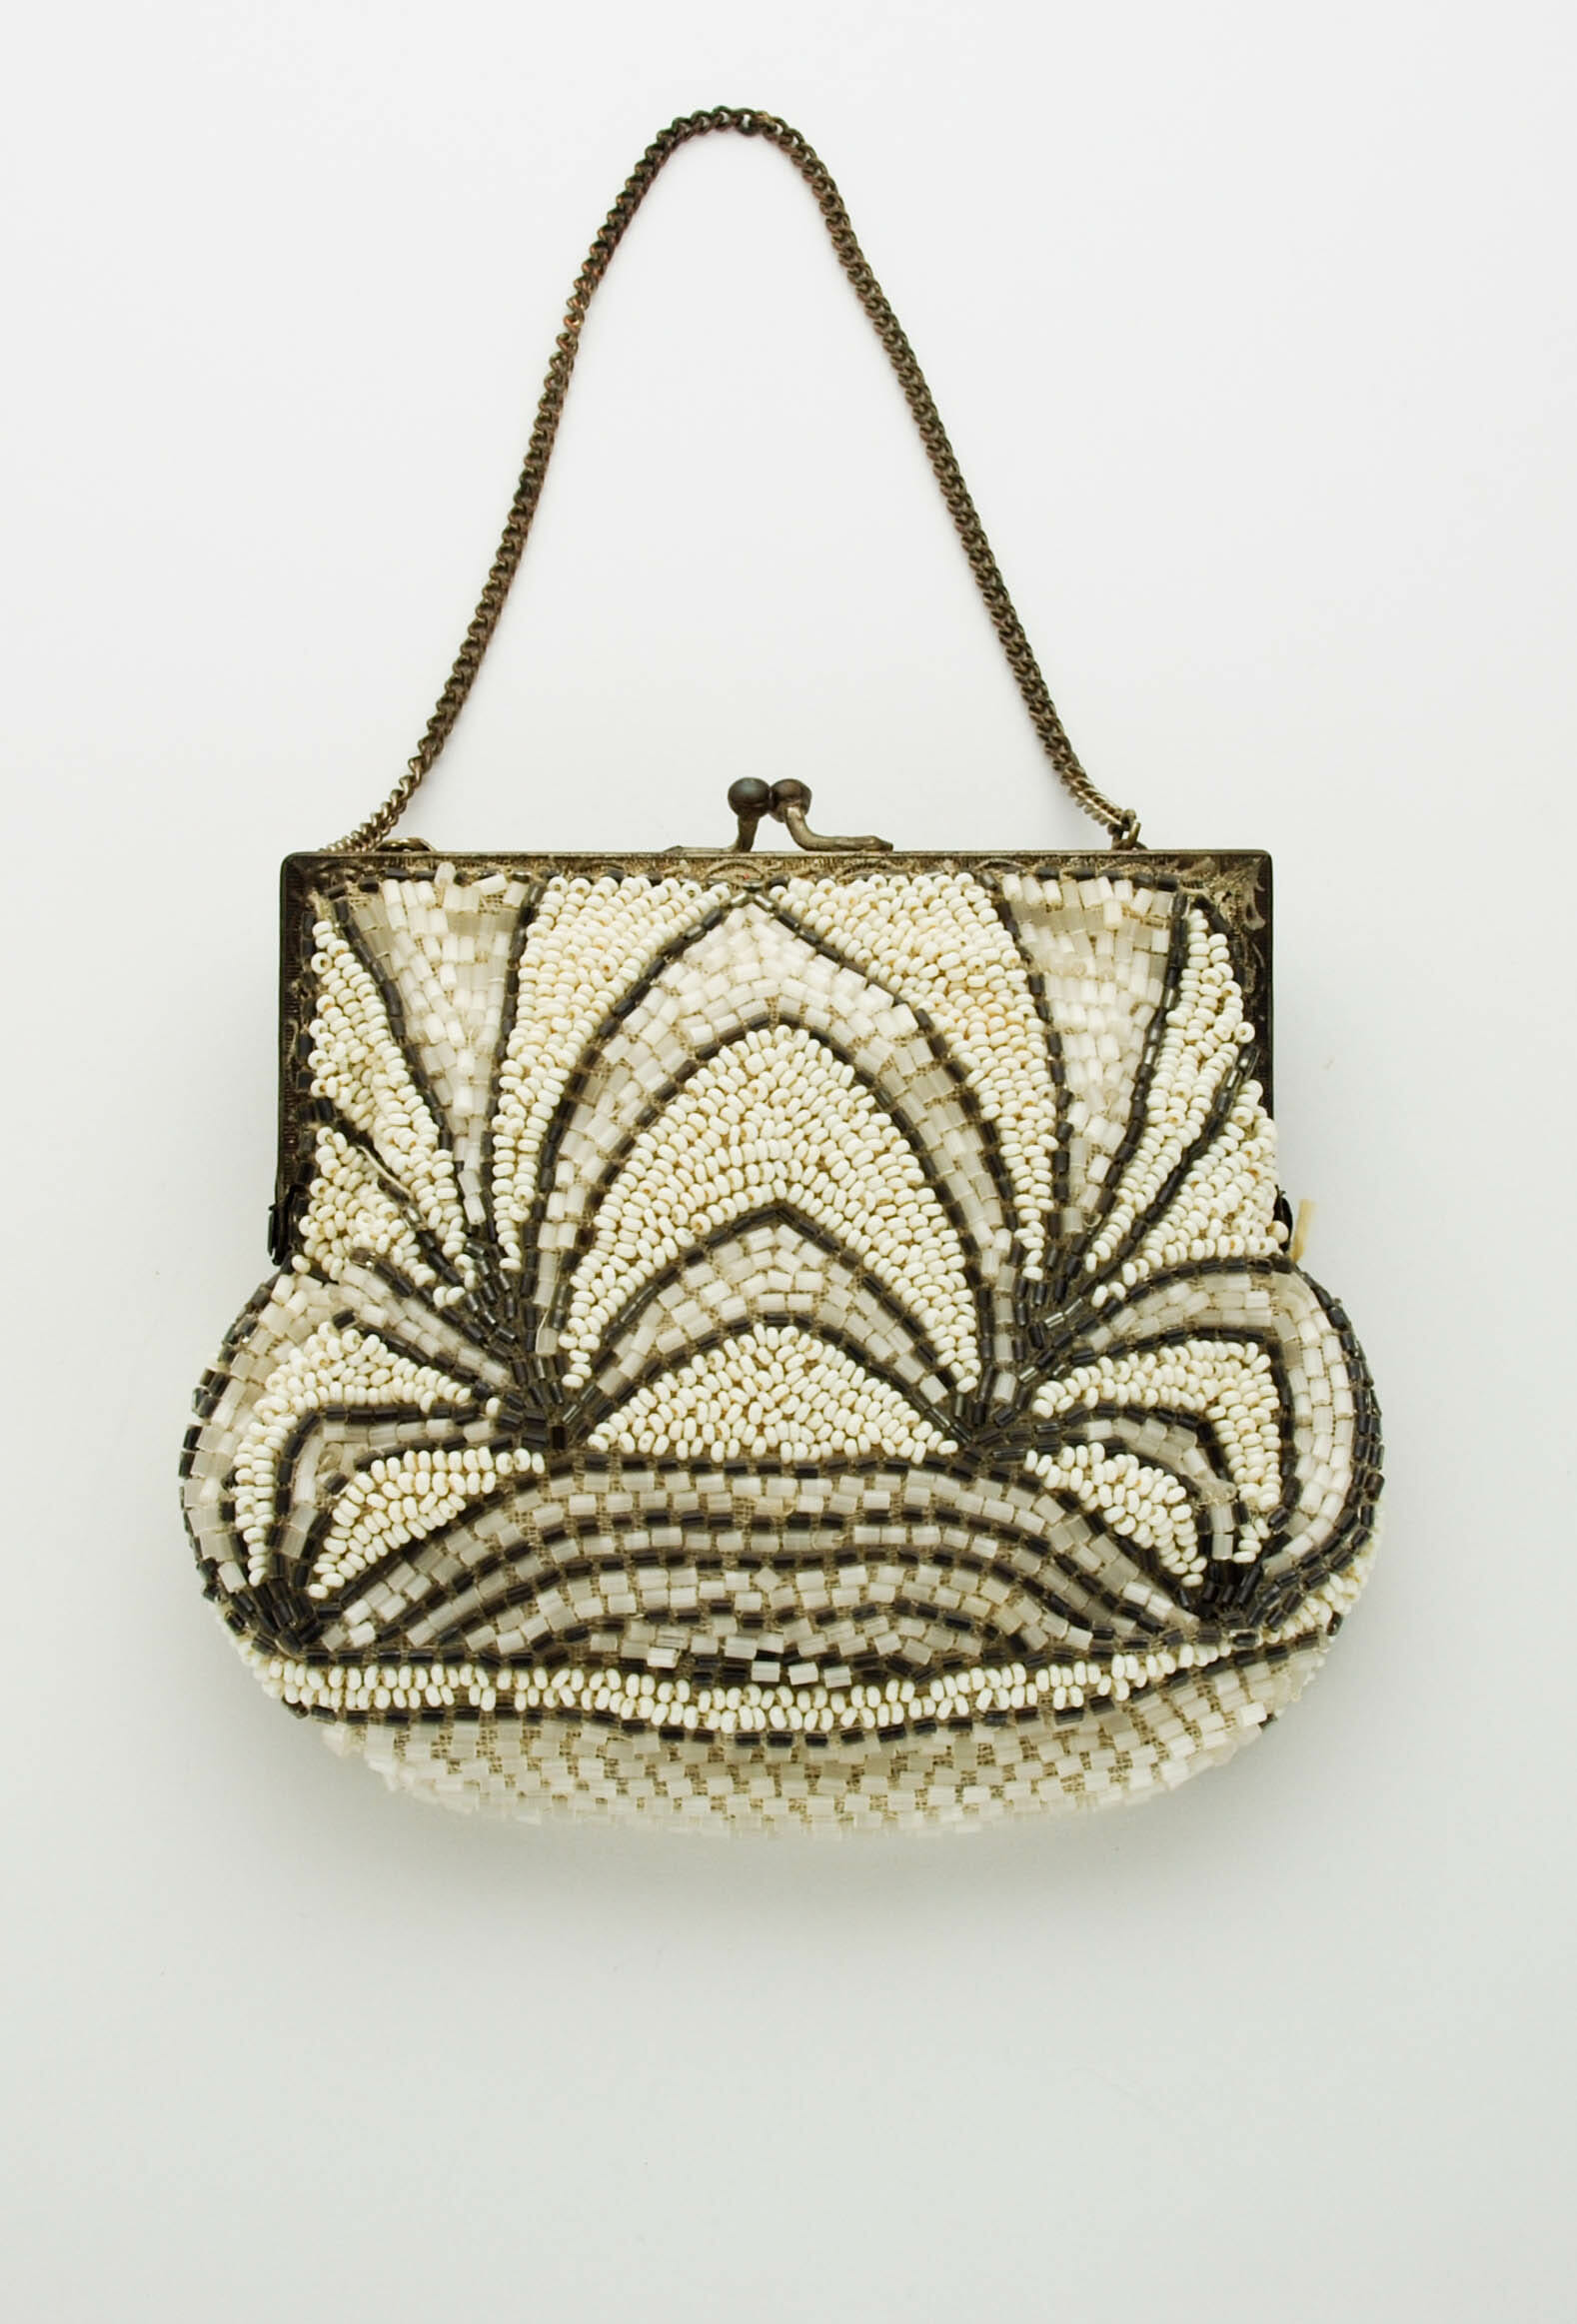 Vintage Beaded Purses - Anne Gregory